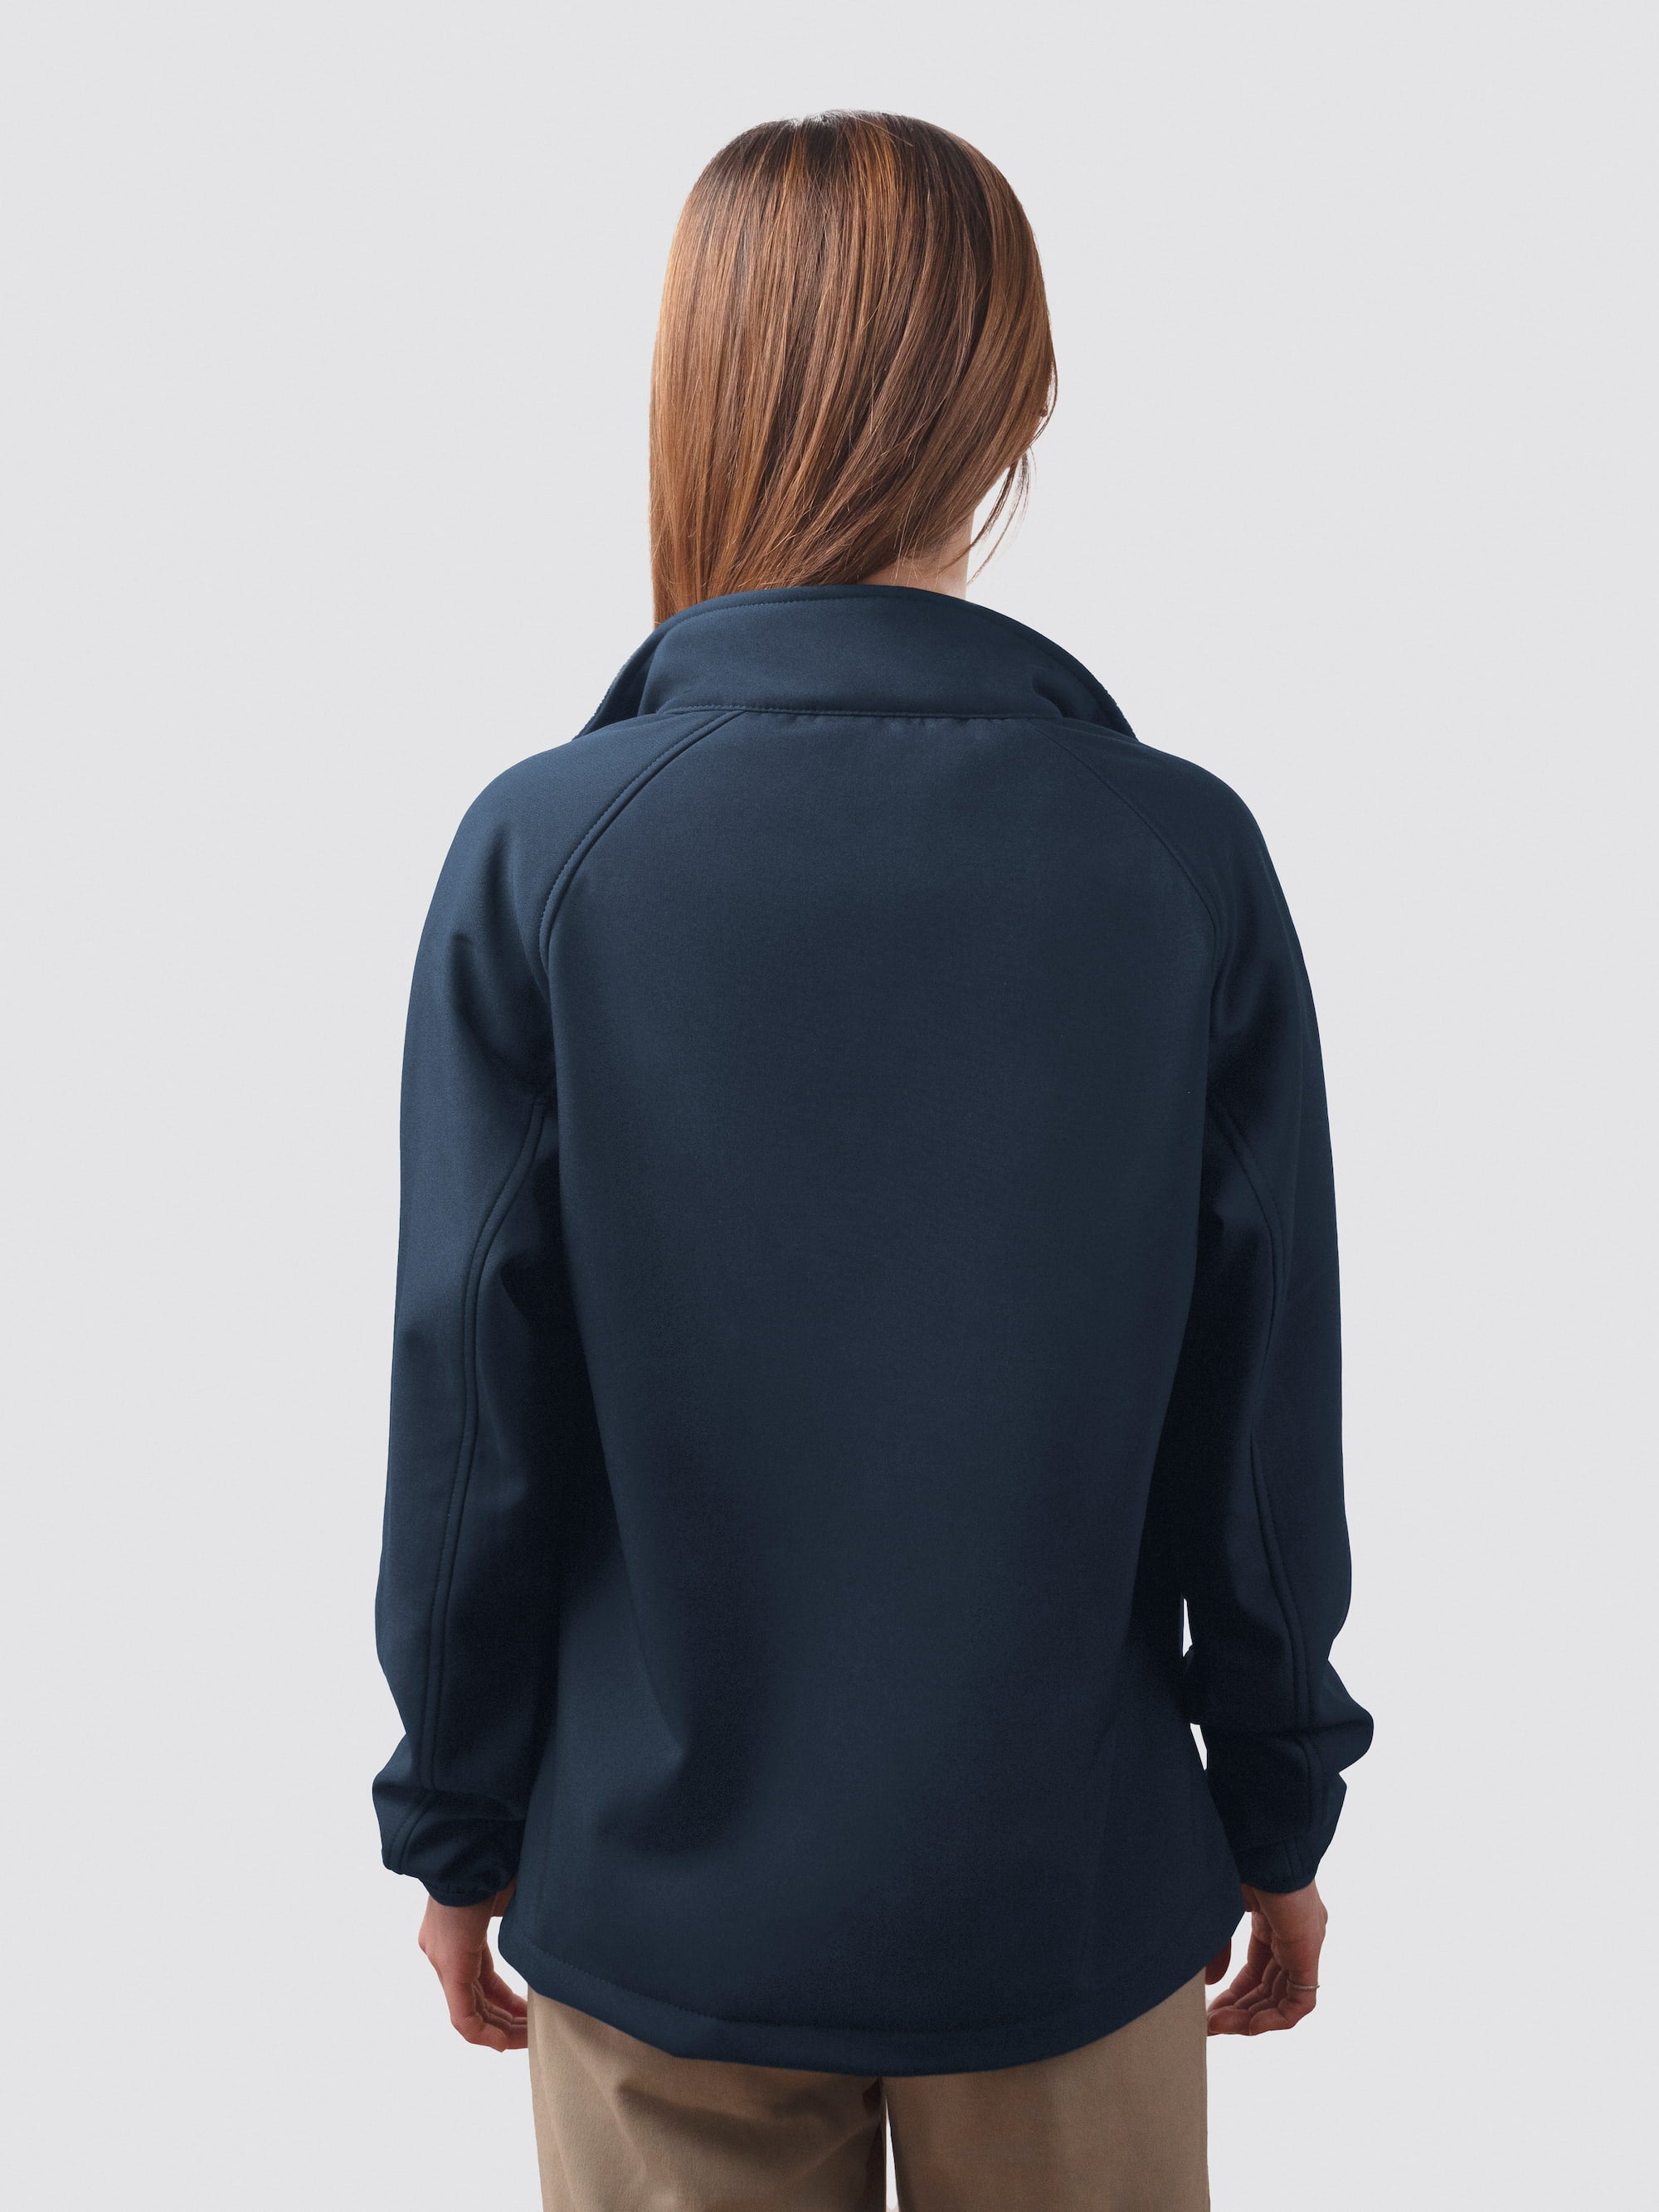 Navy college jacket for students, made from environmentally-friendly yarns